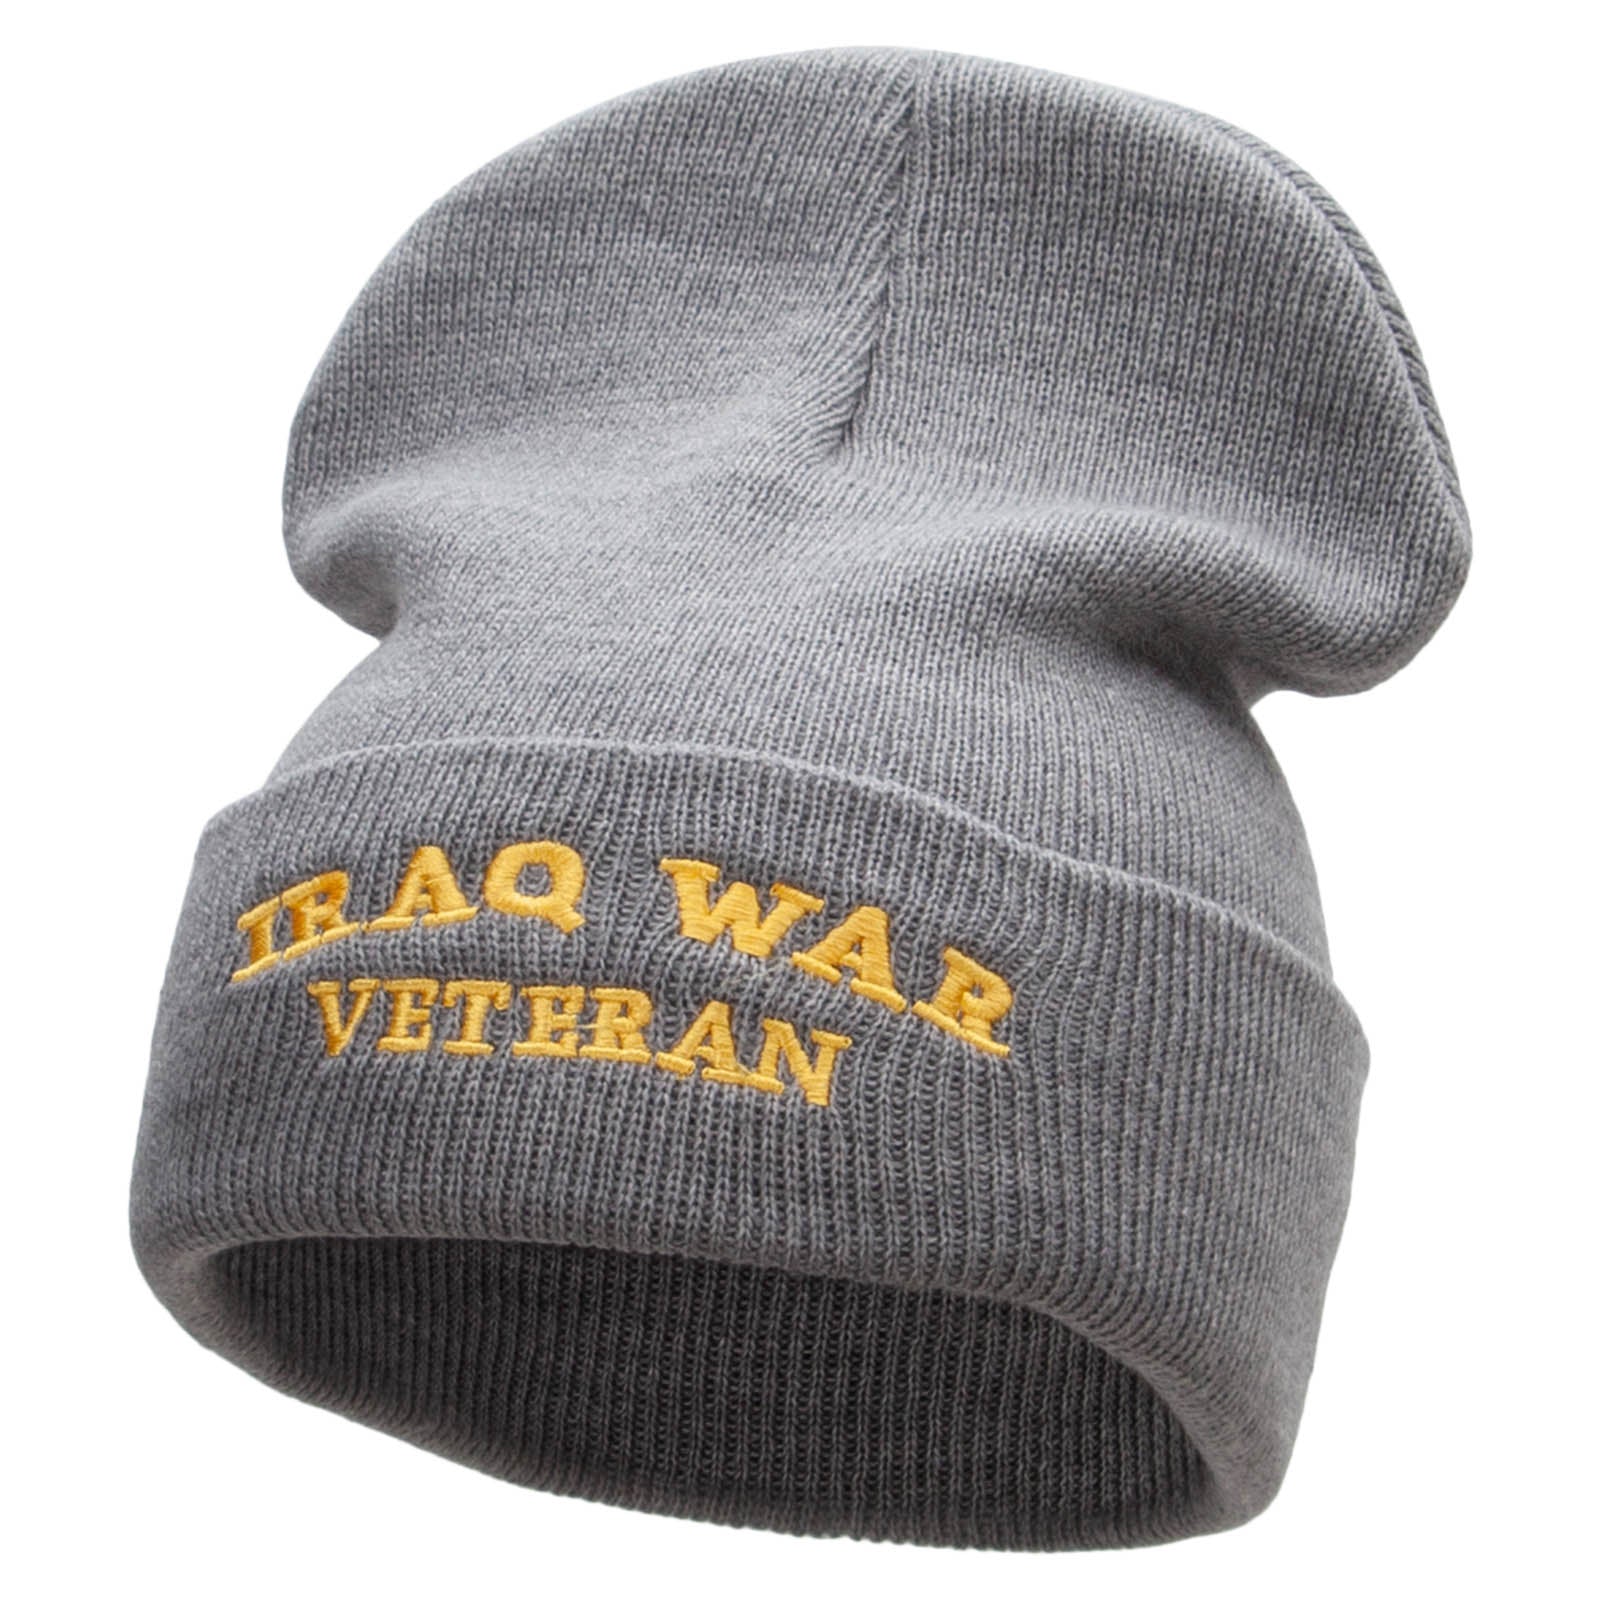 Iraq War Vet Embroidered 12 Inch Solid Long Beanie Made in USA - Lt Grey OSFM